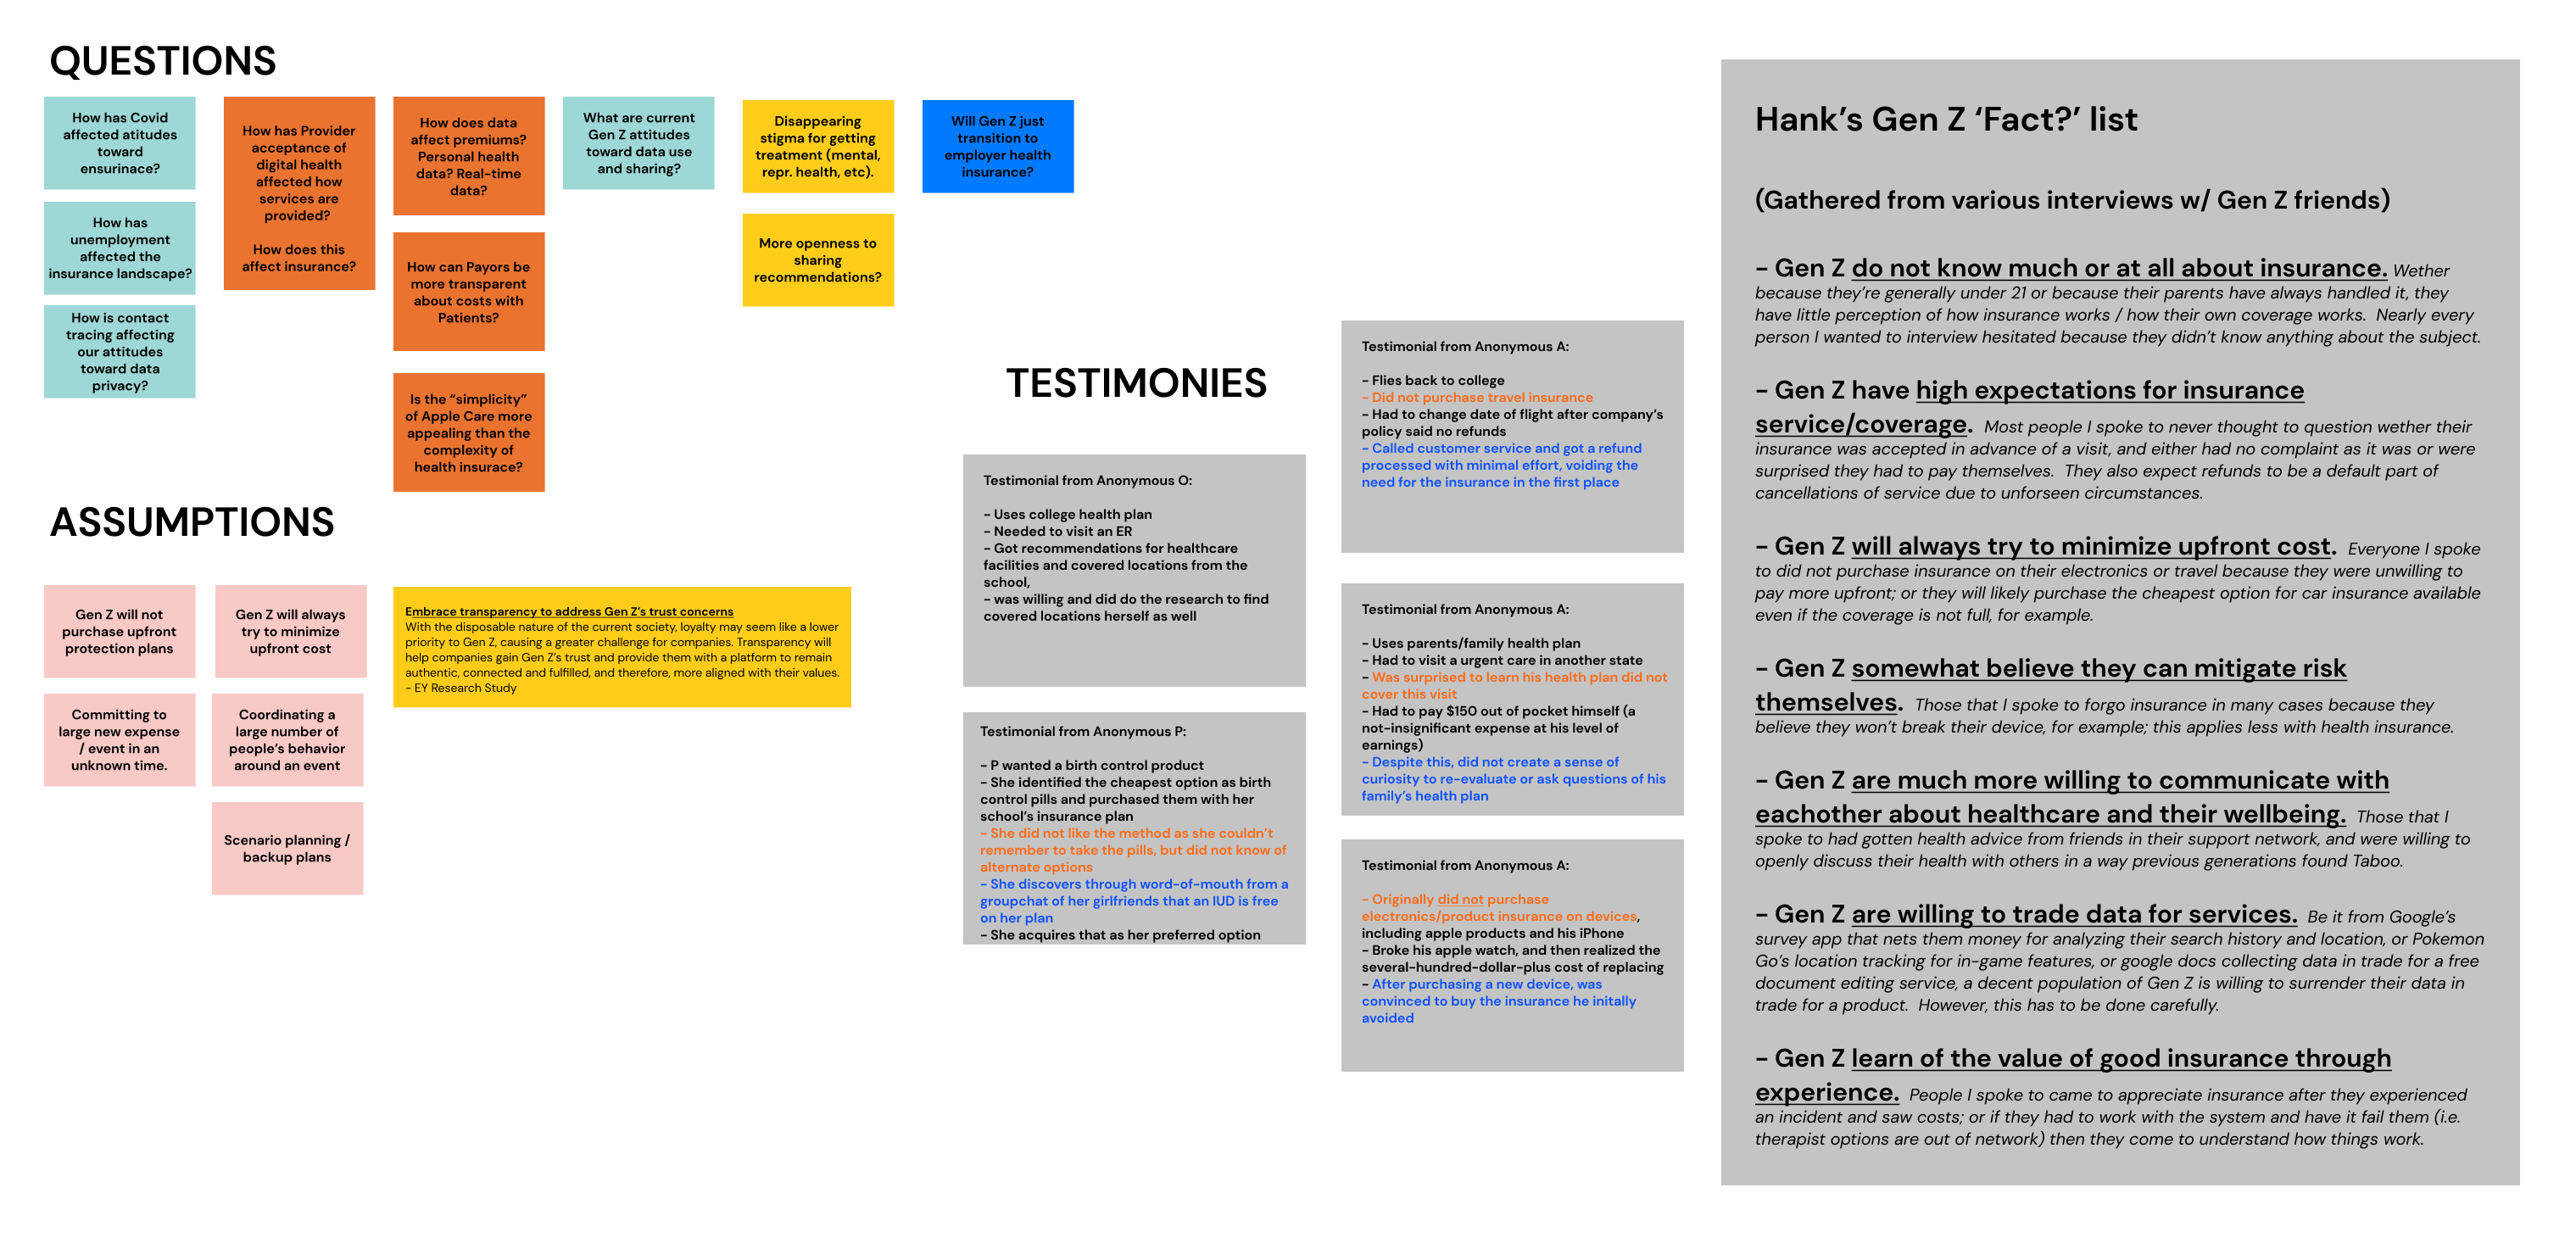 Our initial questions & assumptions coupled with my user research results.